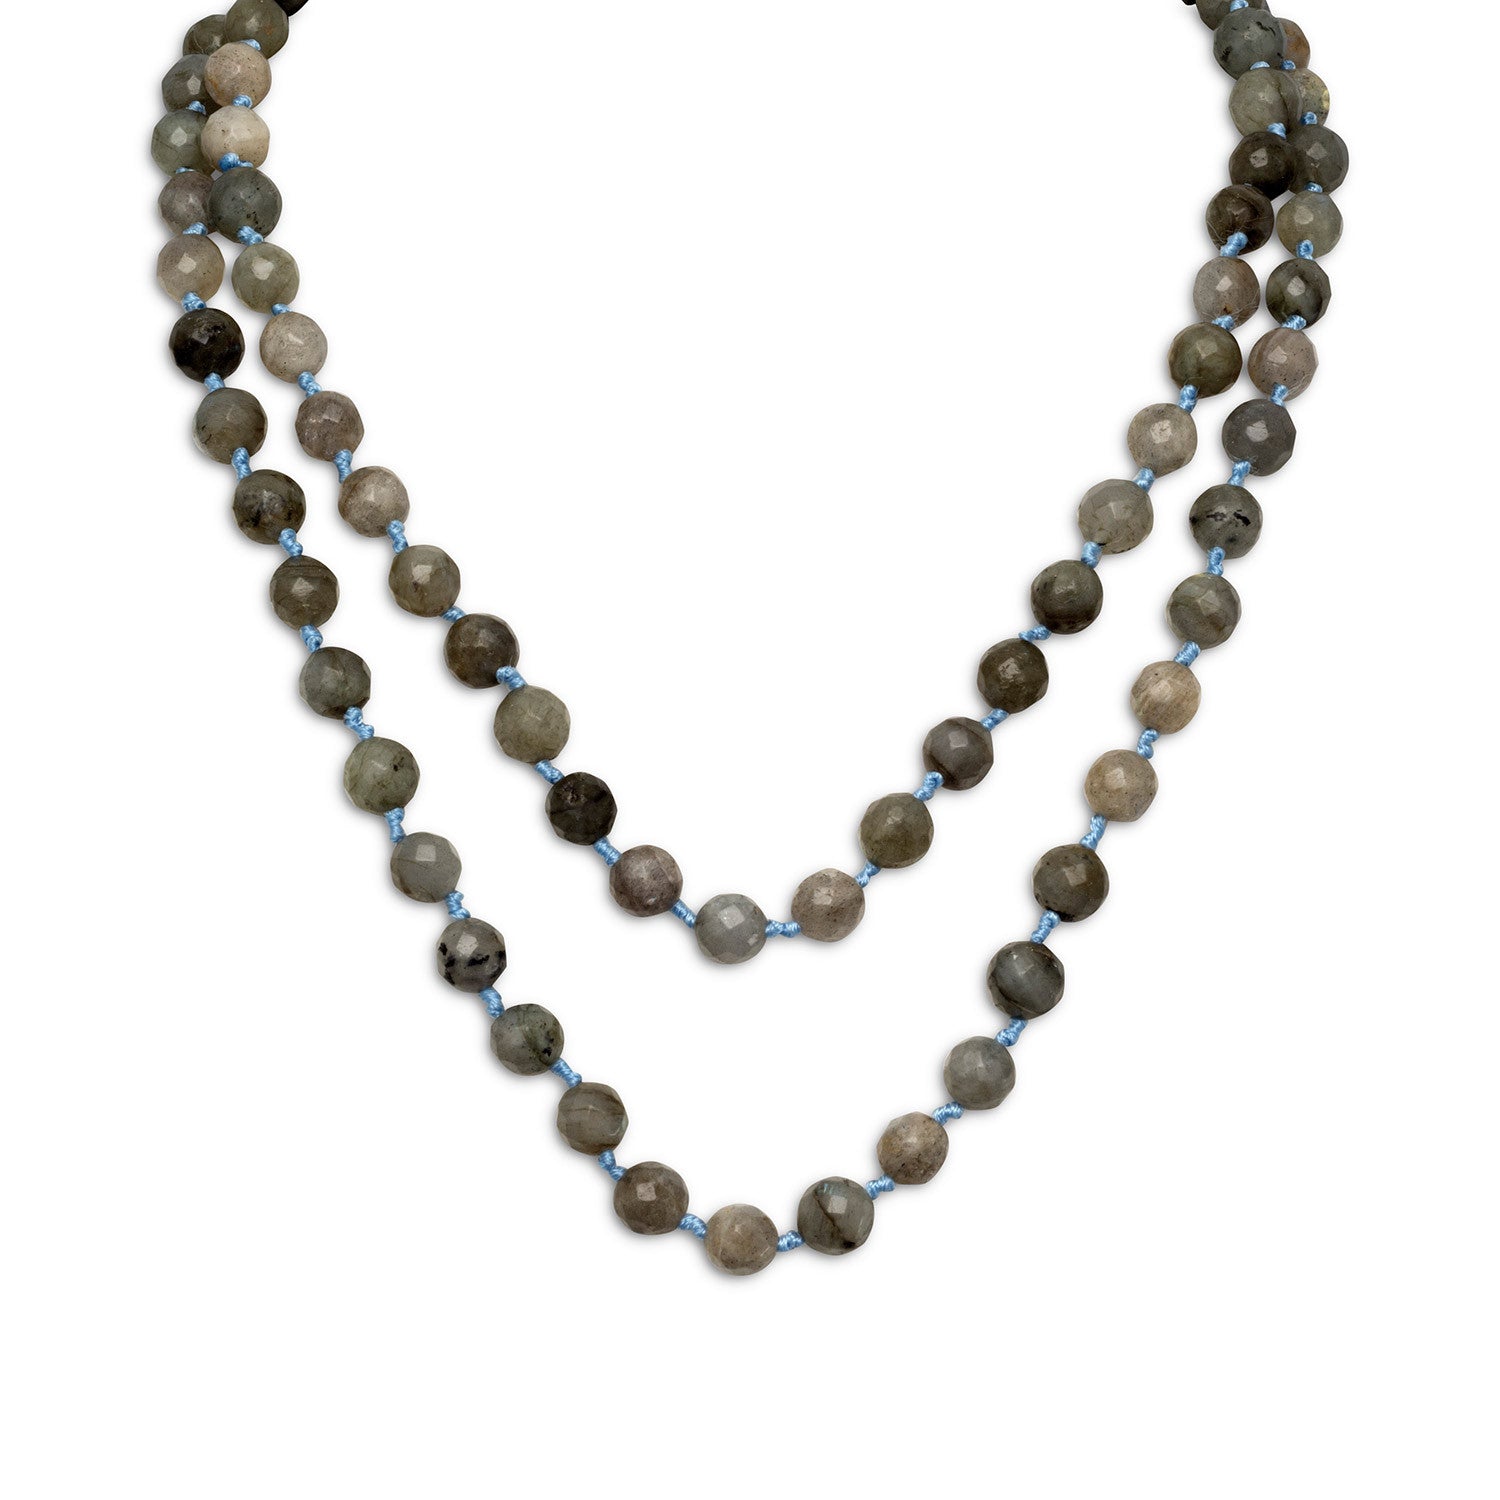 38" Endless Knotted Labradorite Necklace